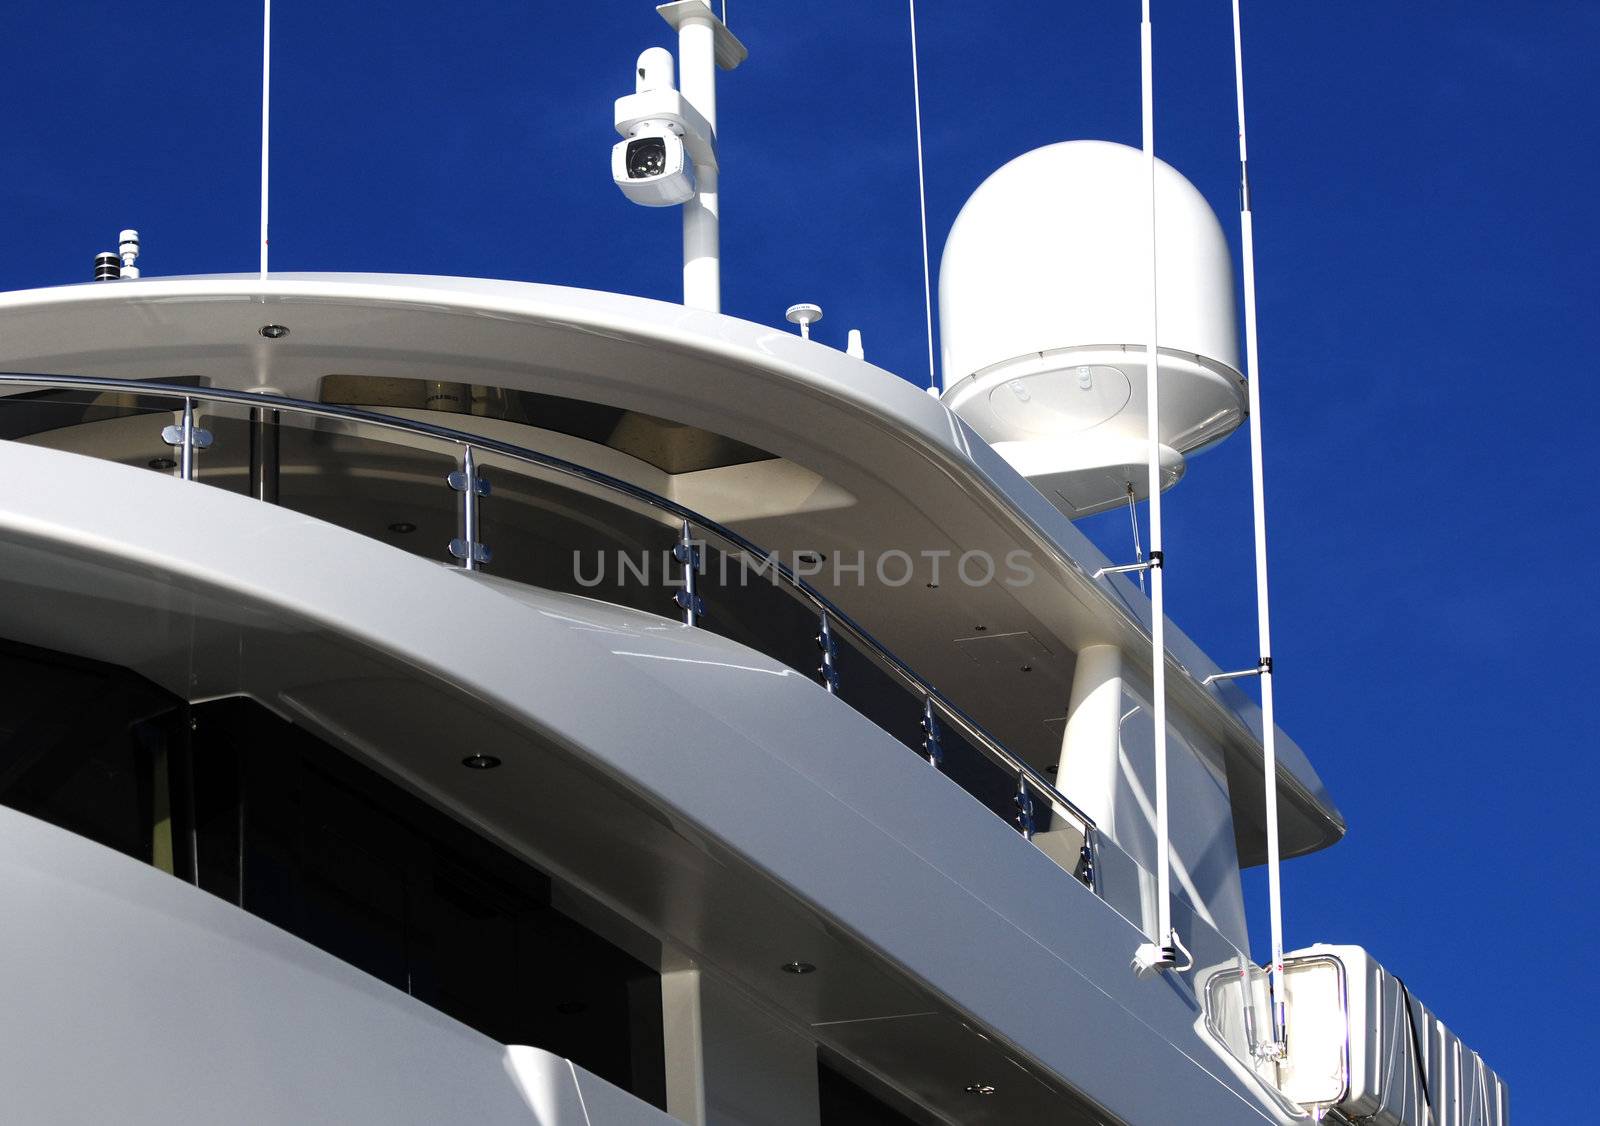 radar and night vision camera on yacht by ftlaudgirl